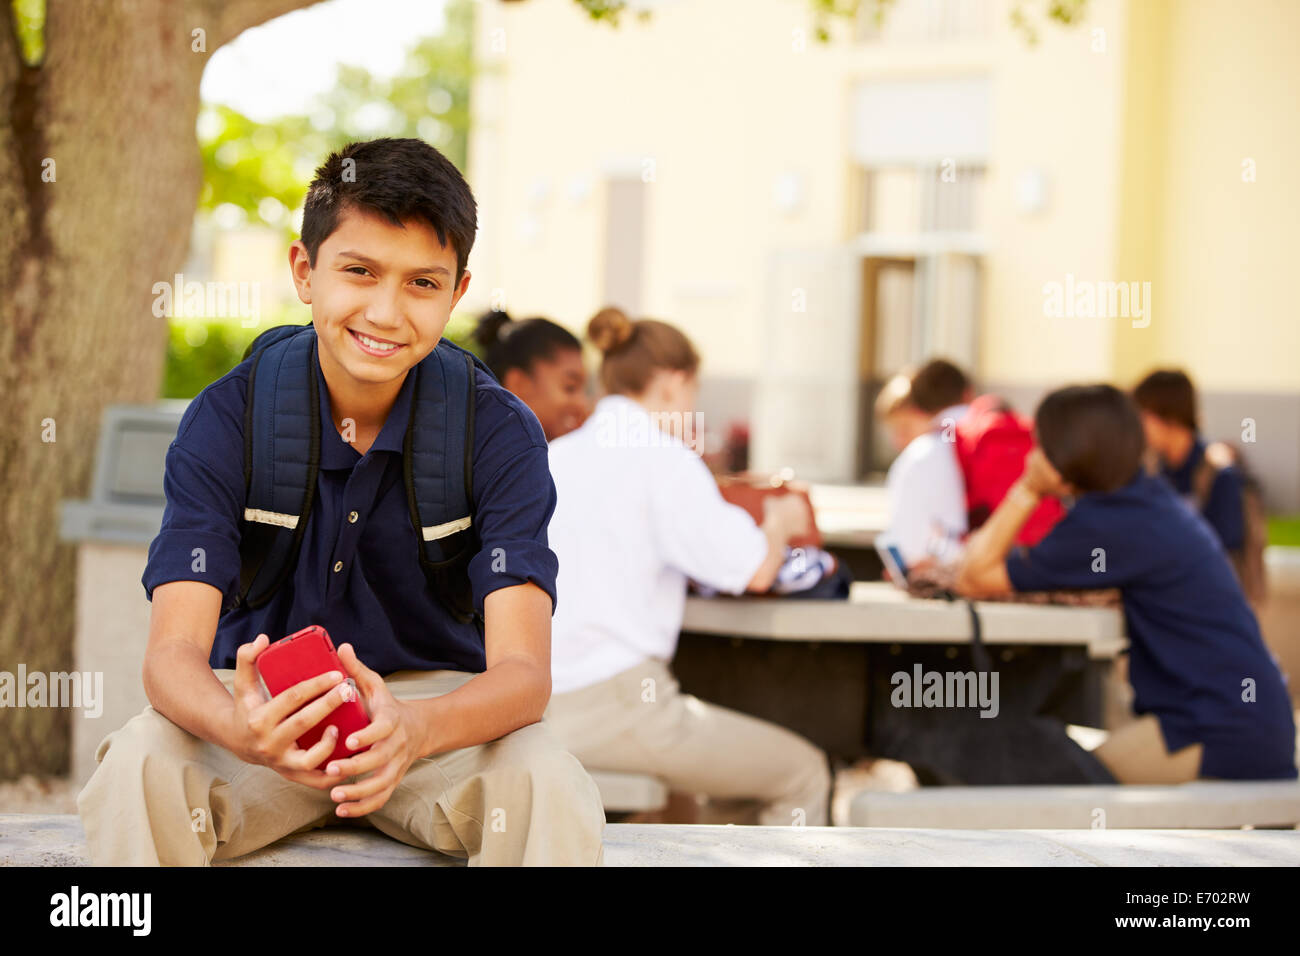 Male High School Student Using Phone On School Campus Stock Photo